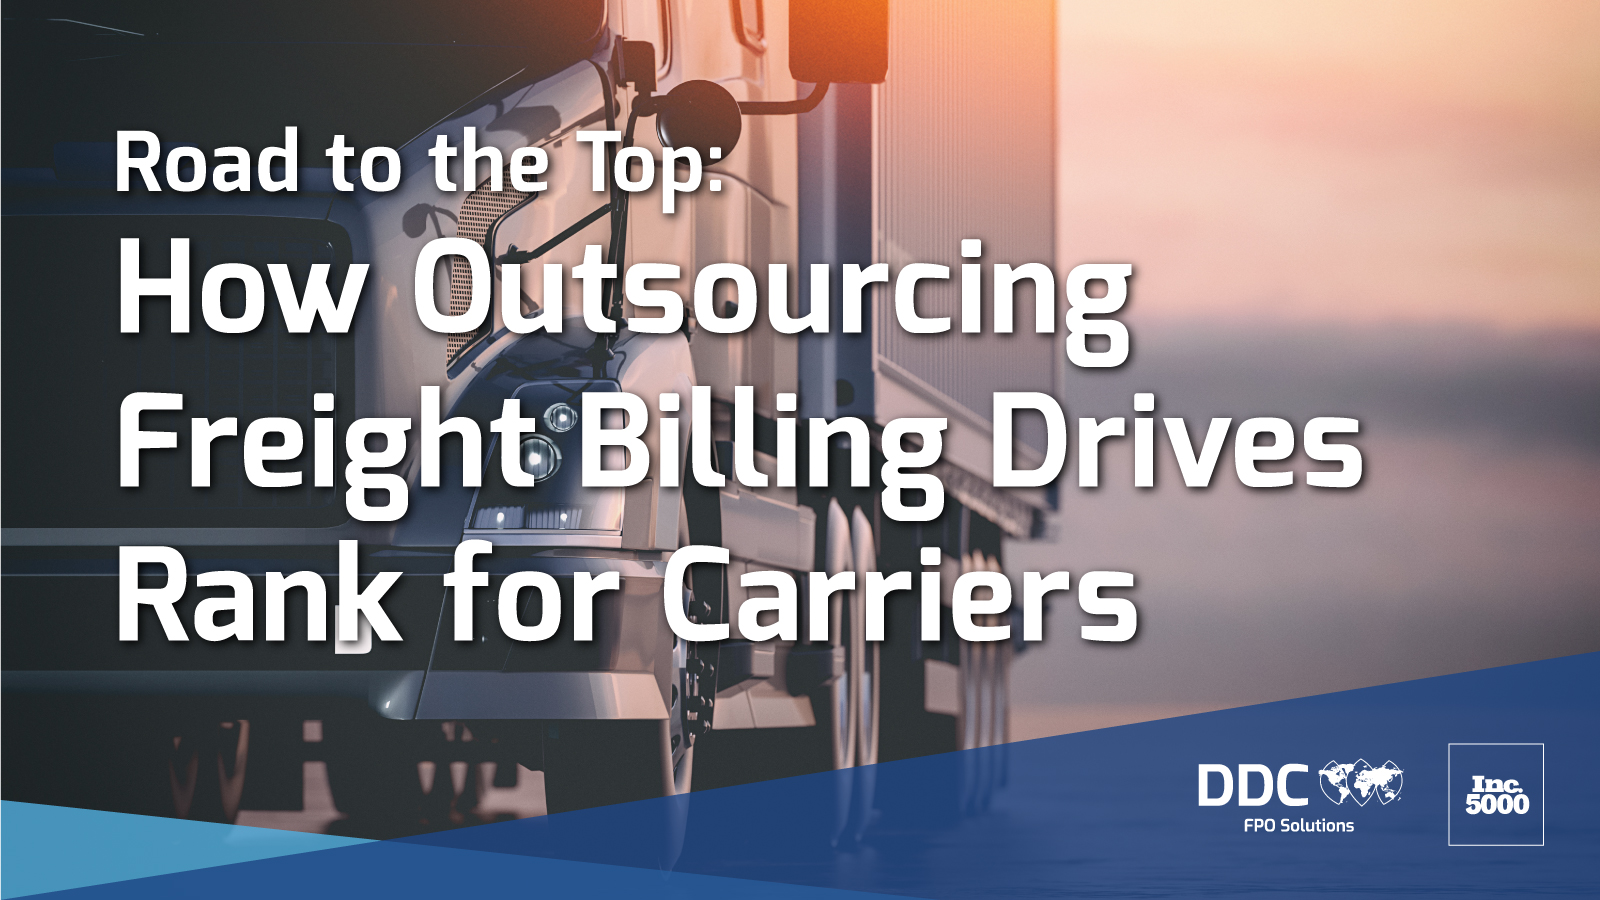 Road to the Top: How Outsourcing Freight Billing Drives Rank for Carriers